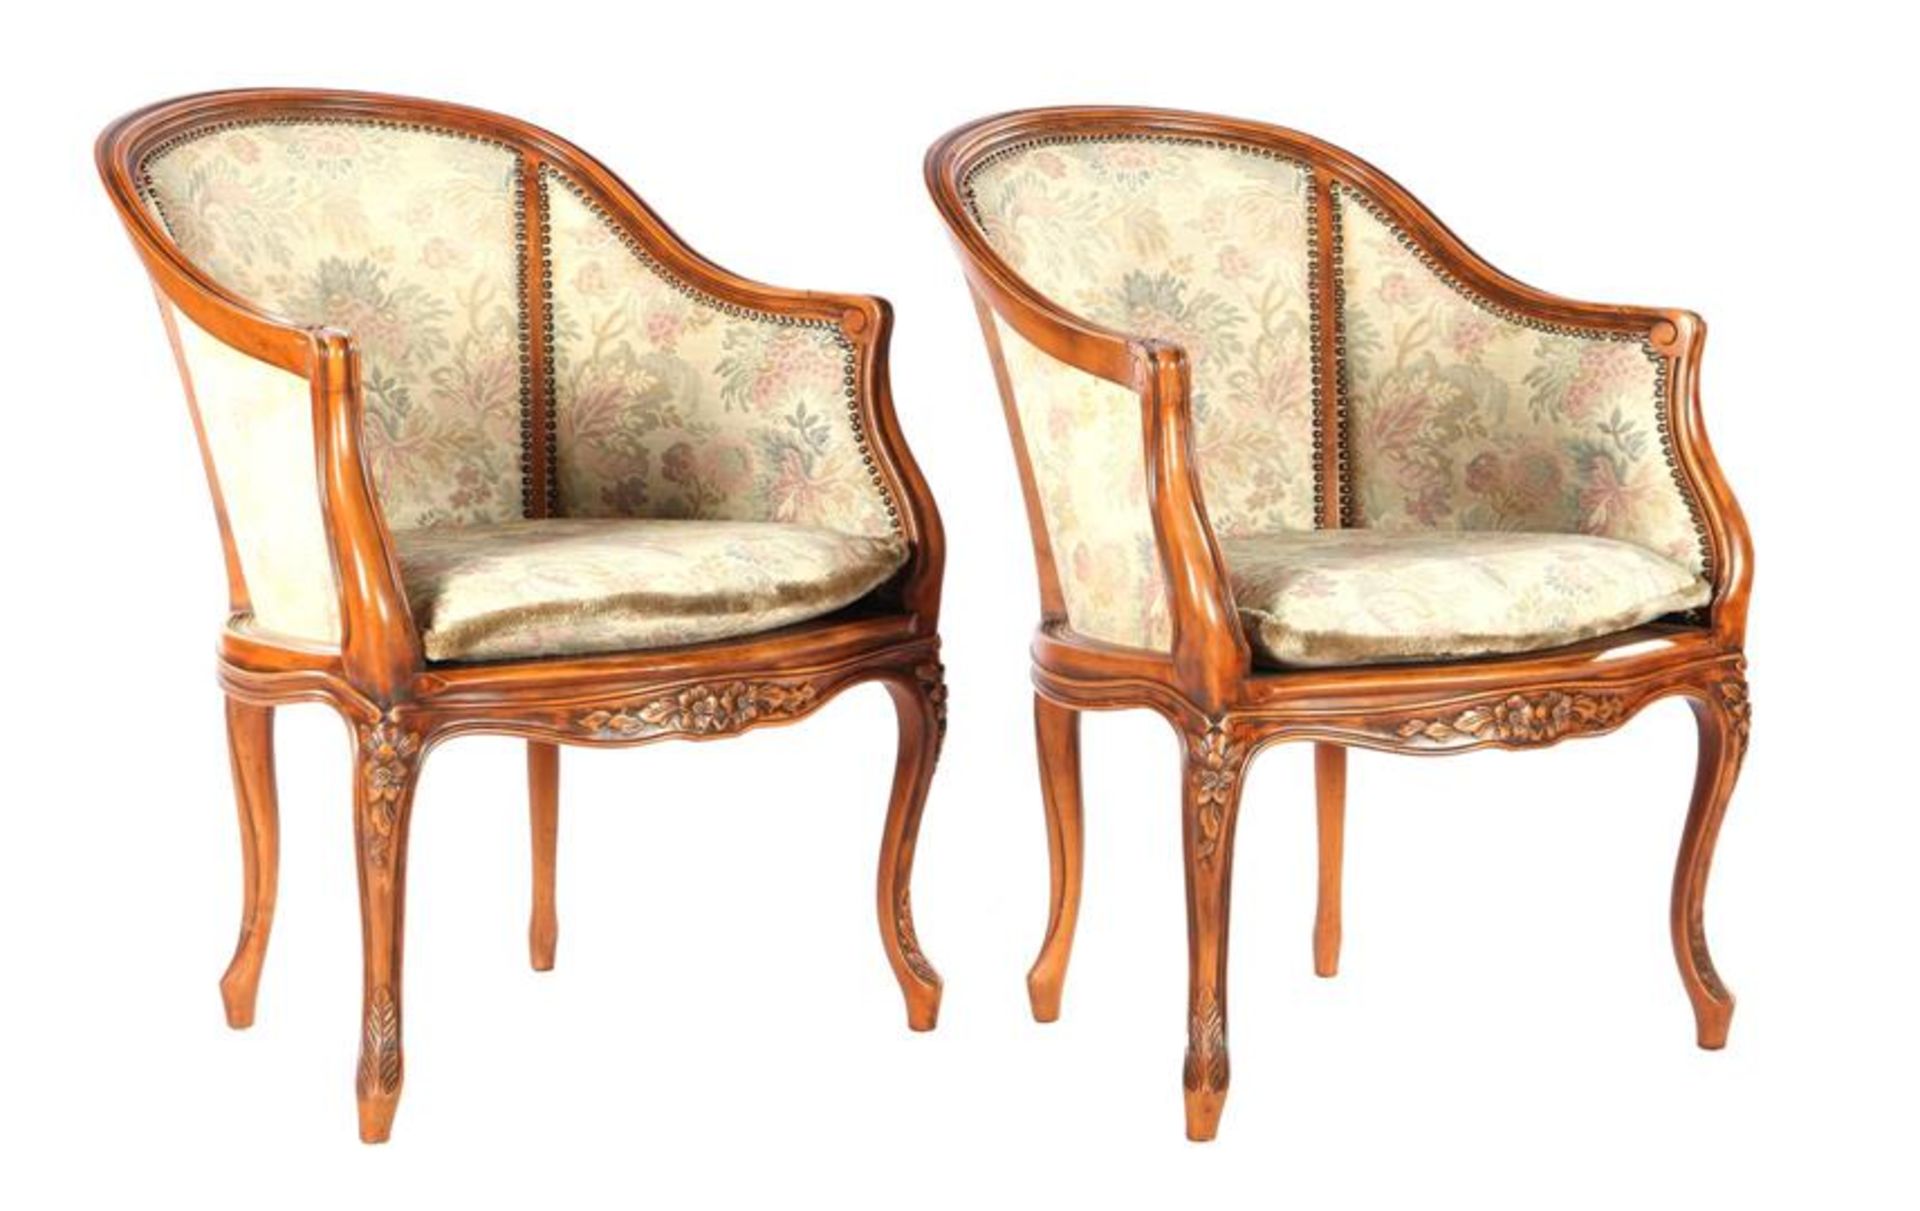 2 walnut trees with classic upholstery